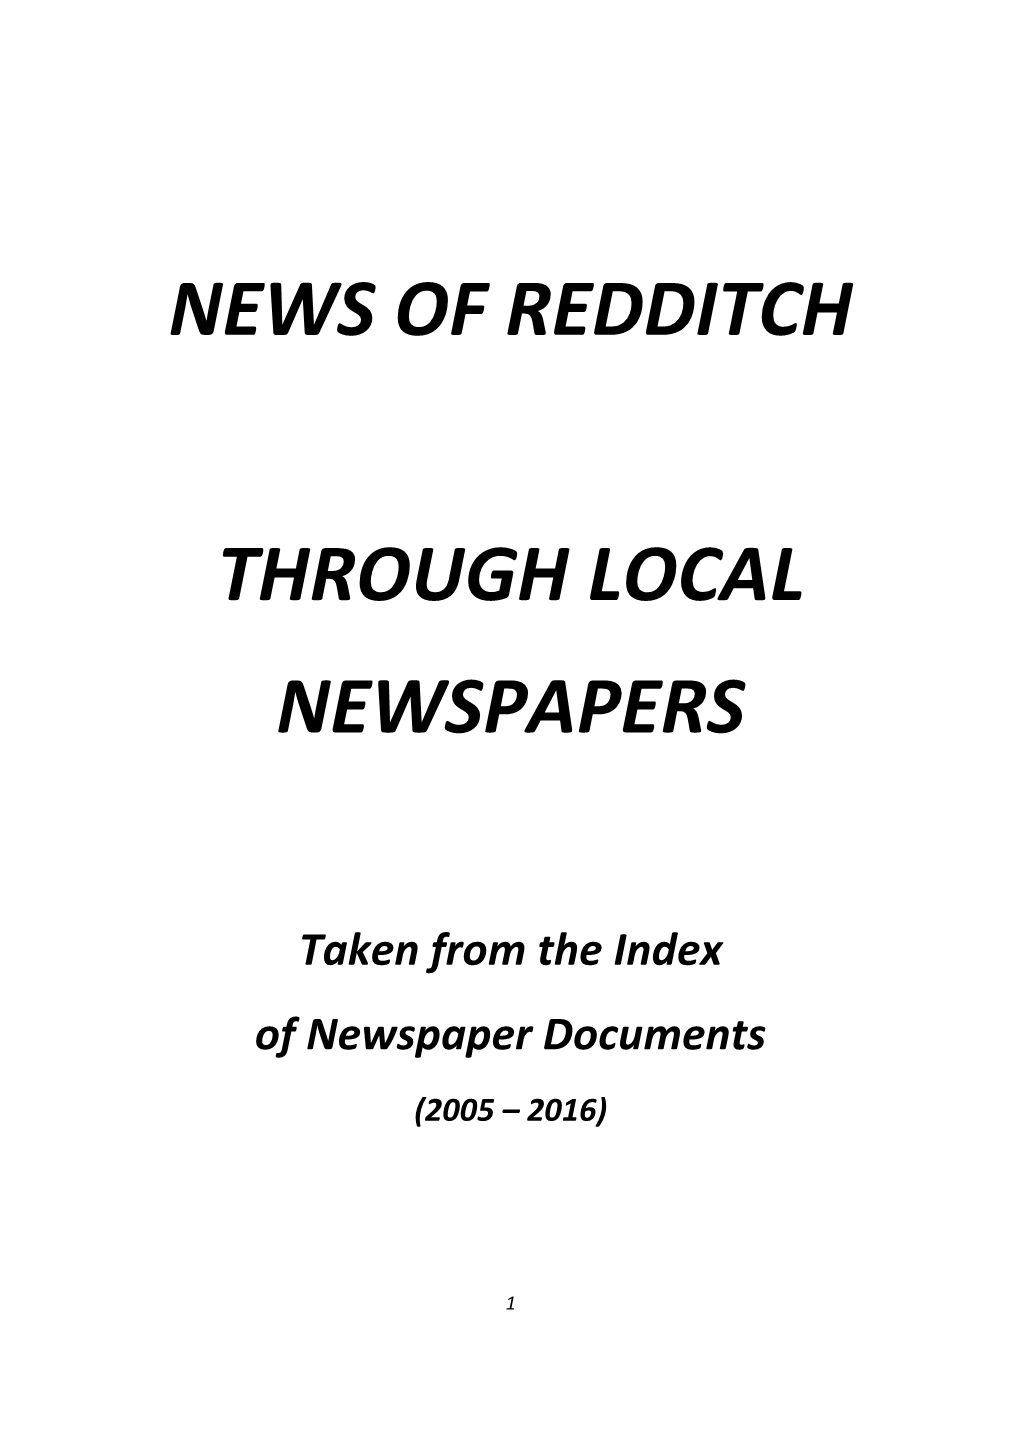 News of Redditch Through Local Newspapers